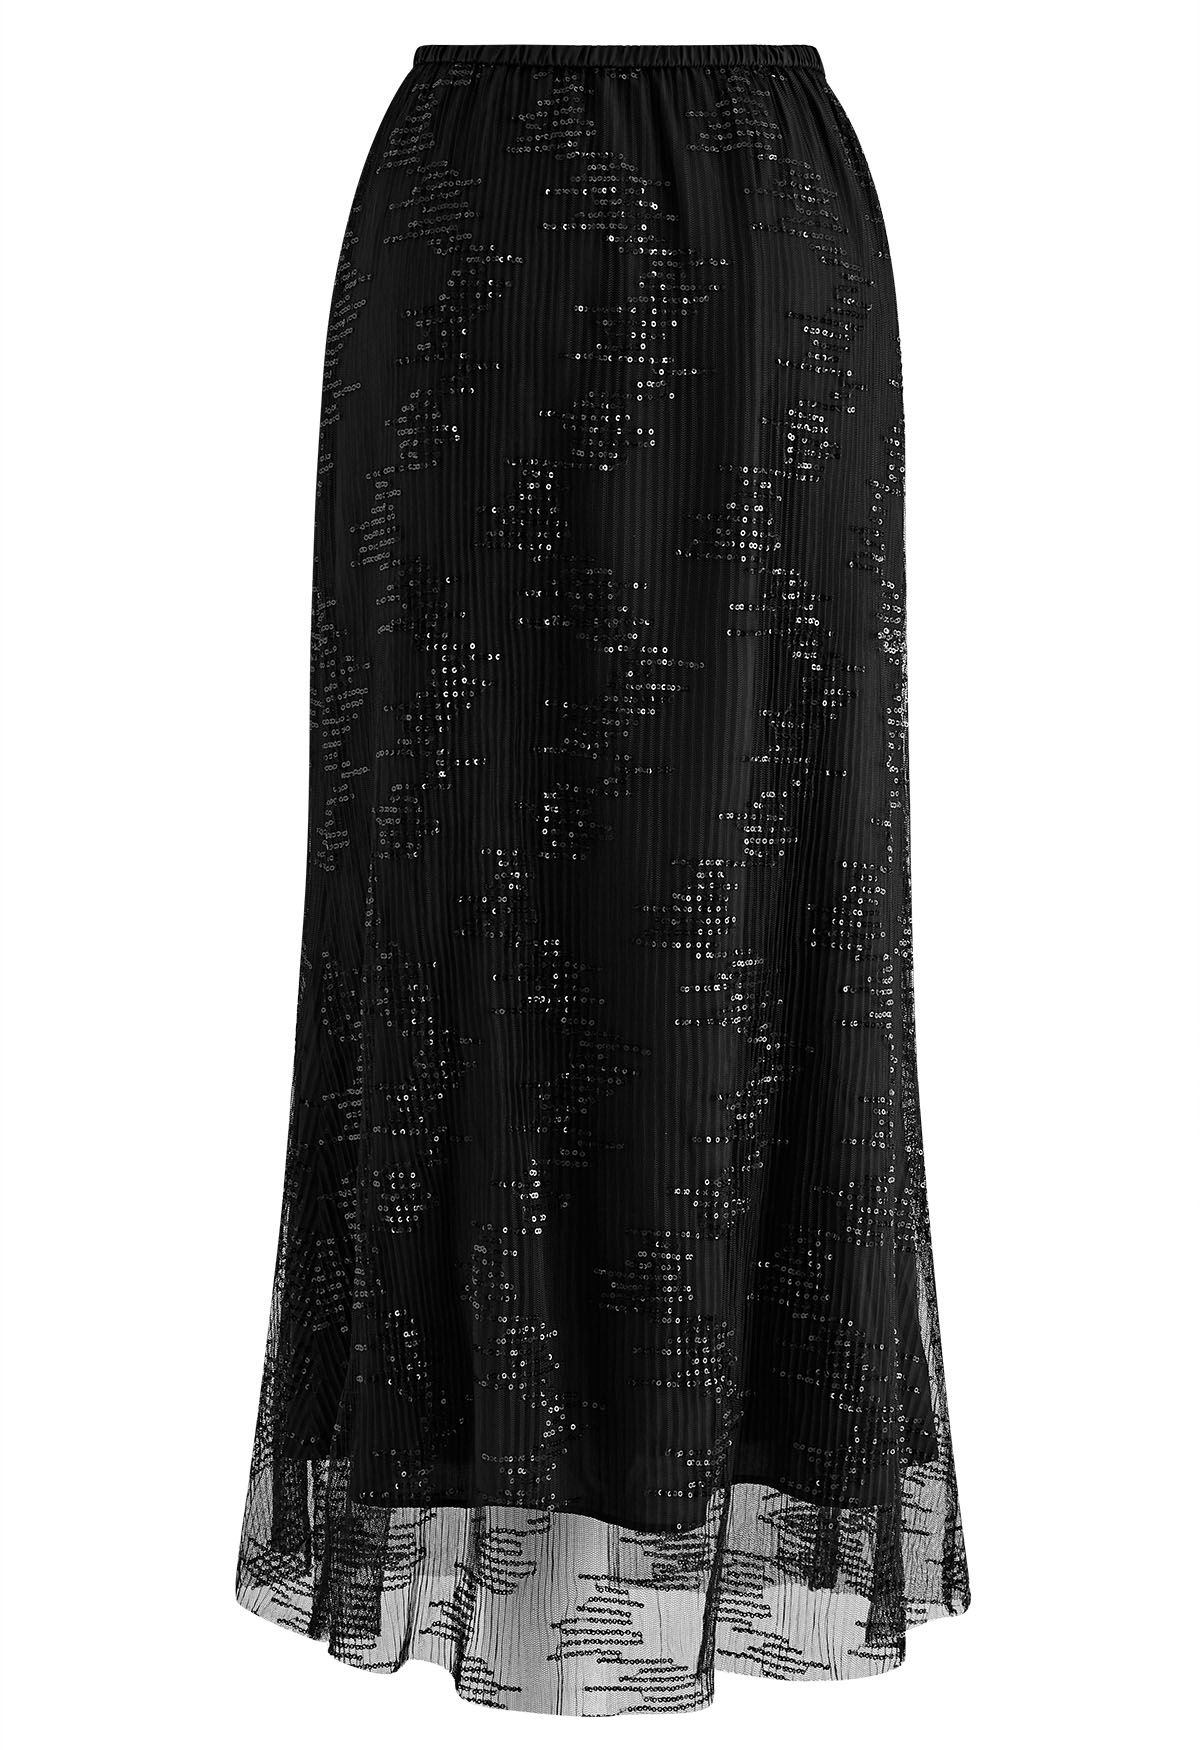 Sequin Embellished Mesh Maxi Skirt in Black - Retro, Indie and Unique ...